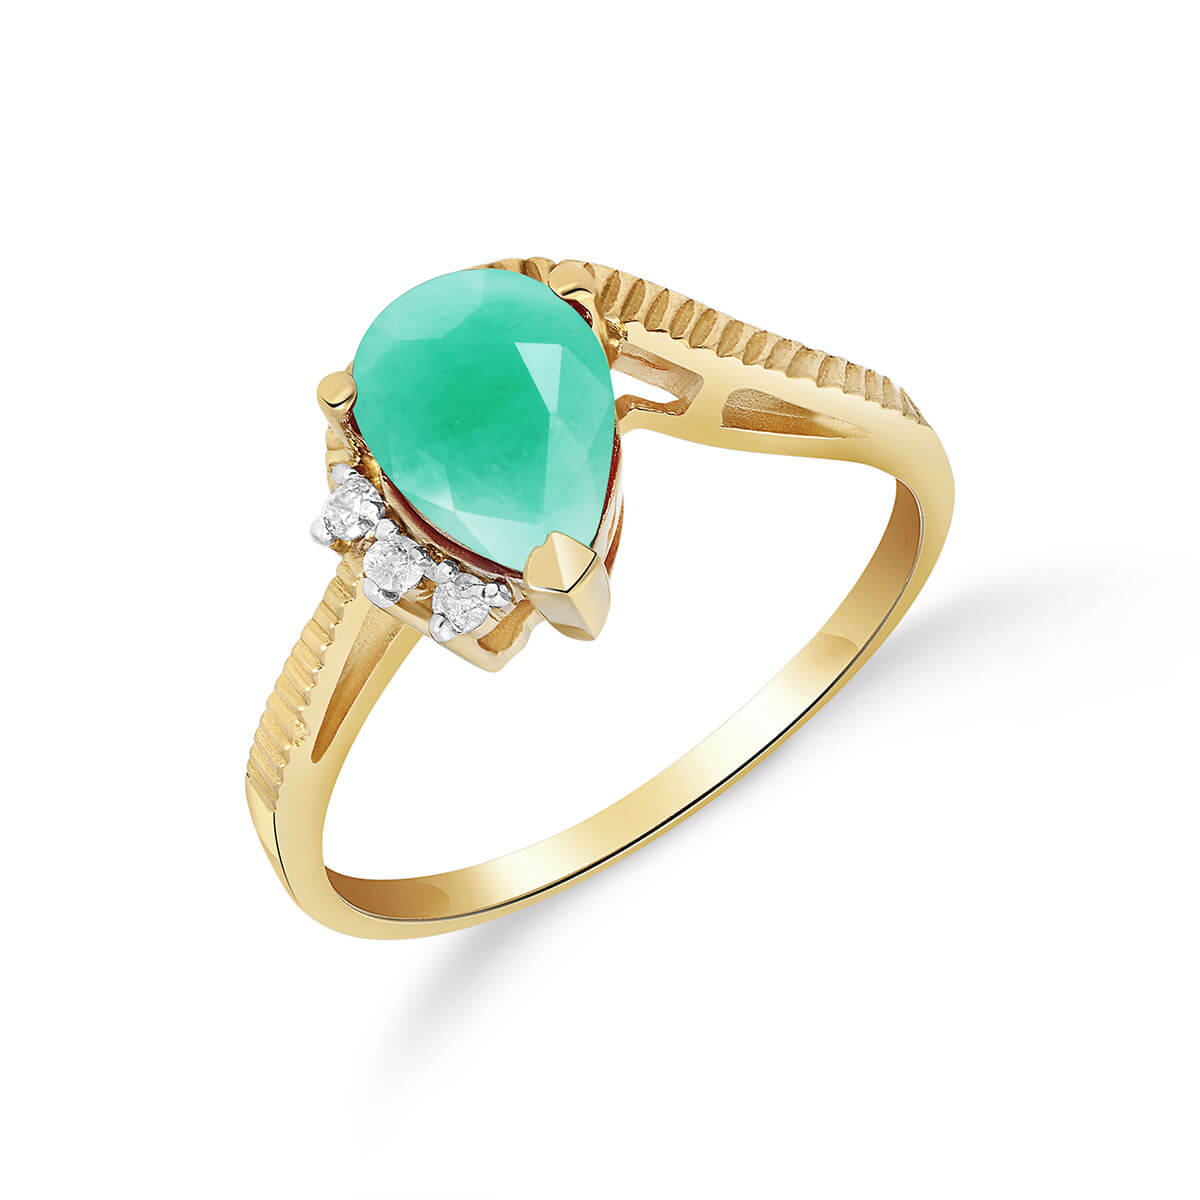 Emerald & Diamond Belle Ring in 9ct Gold